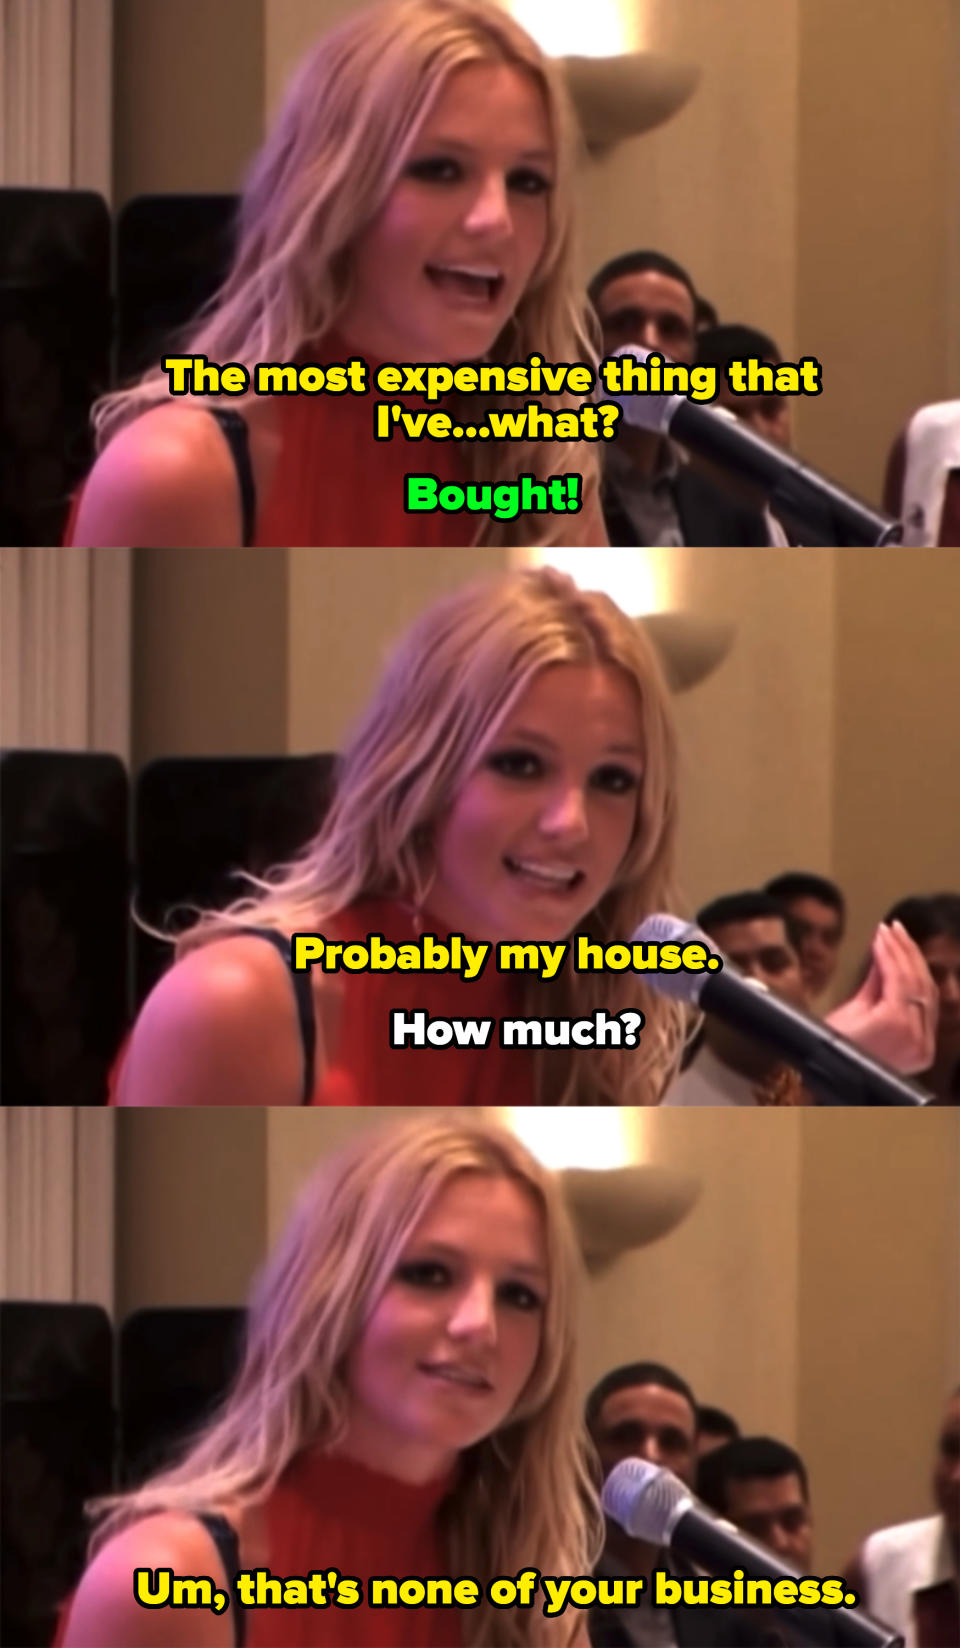 Britney saying her house is probably the most expensive thing she's ever bought, and when asked "How much?" she says "Um, that's none of your business"